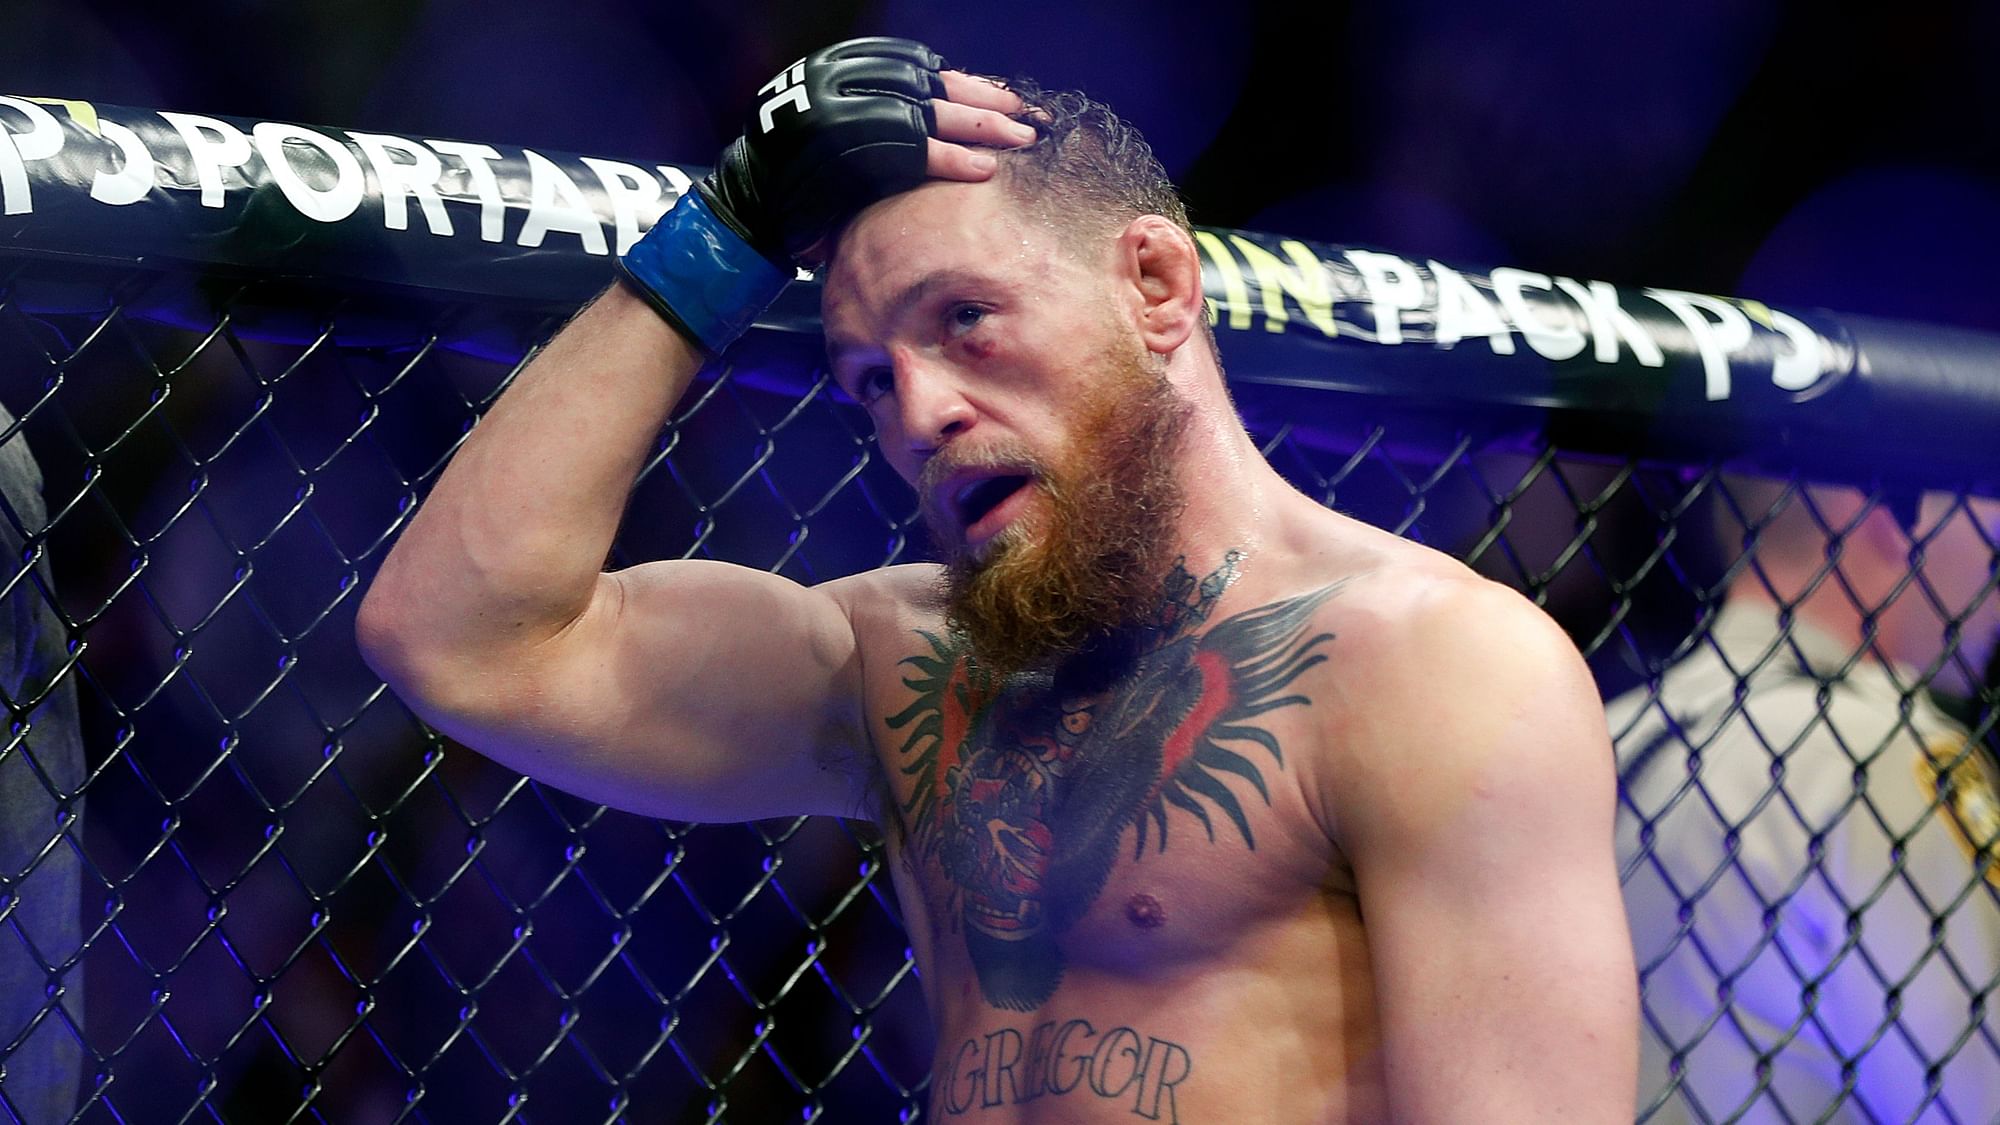 Conor McGregor is facing a civil lawsuit after stealing the cellphone of someone who was trying to take his photo.